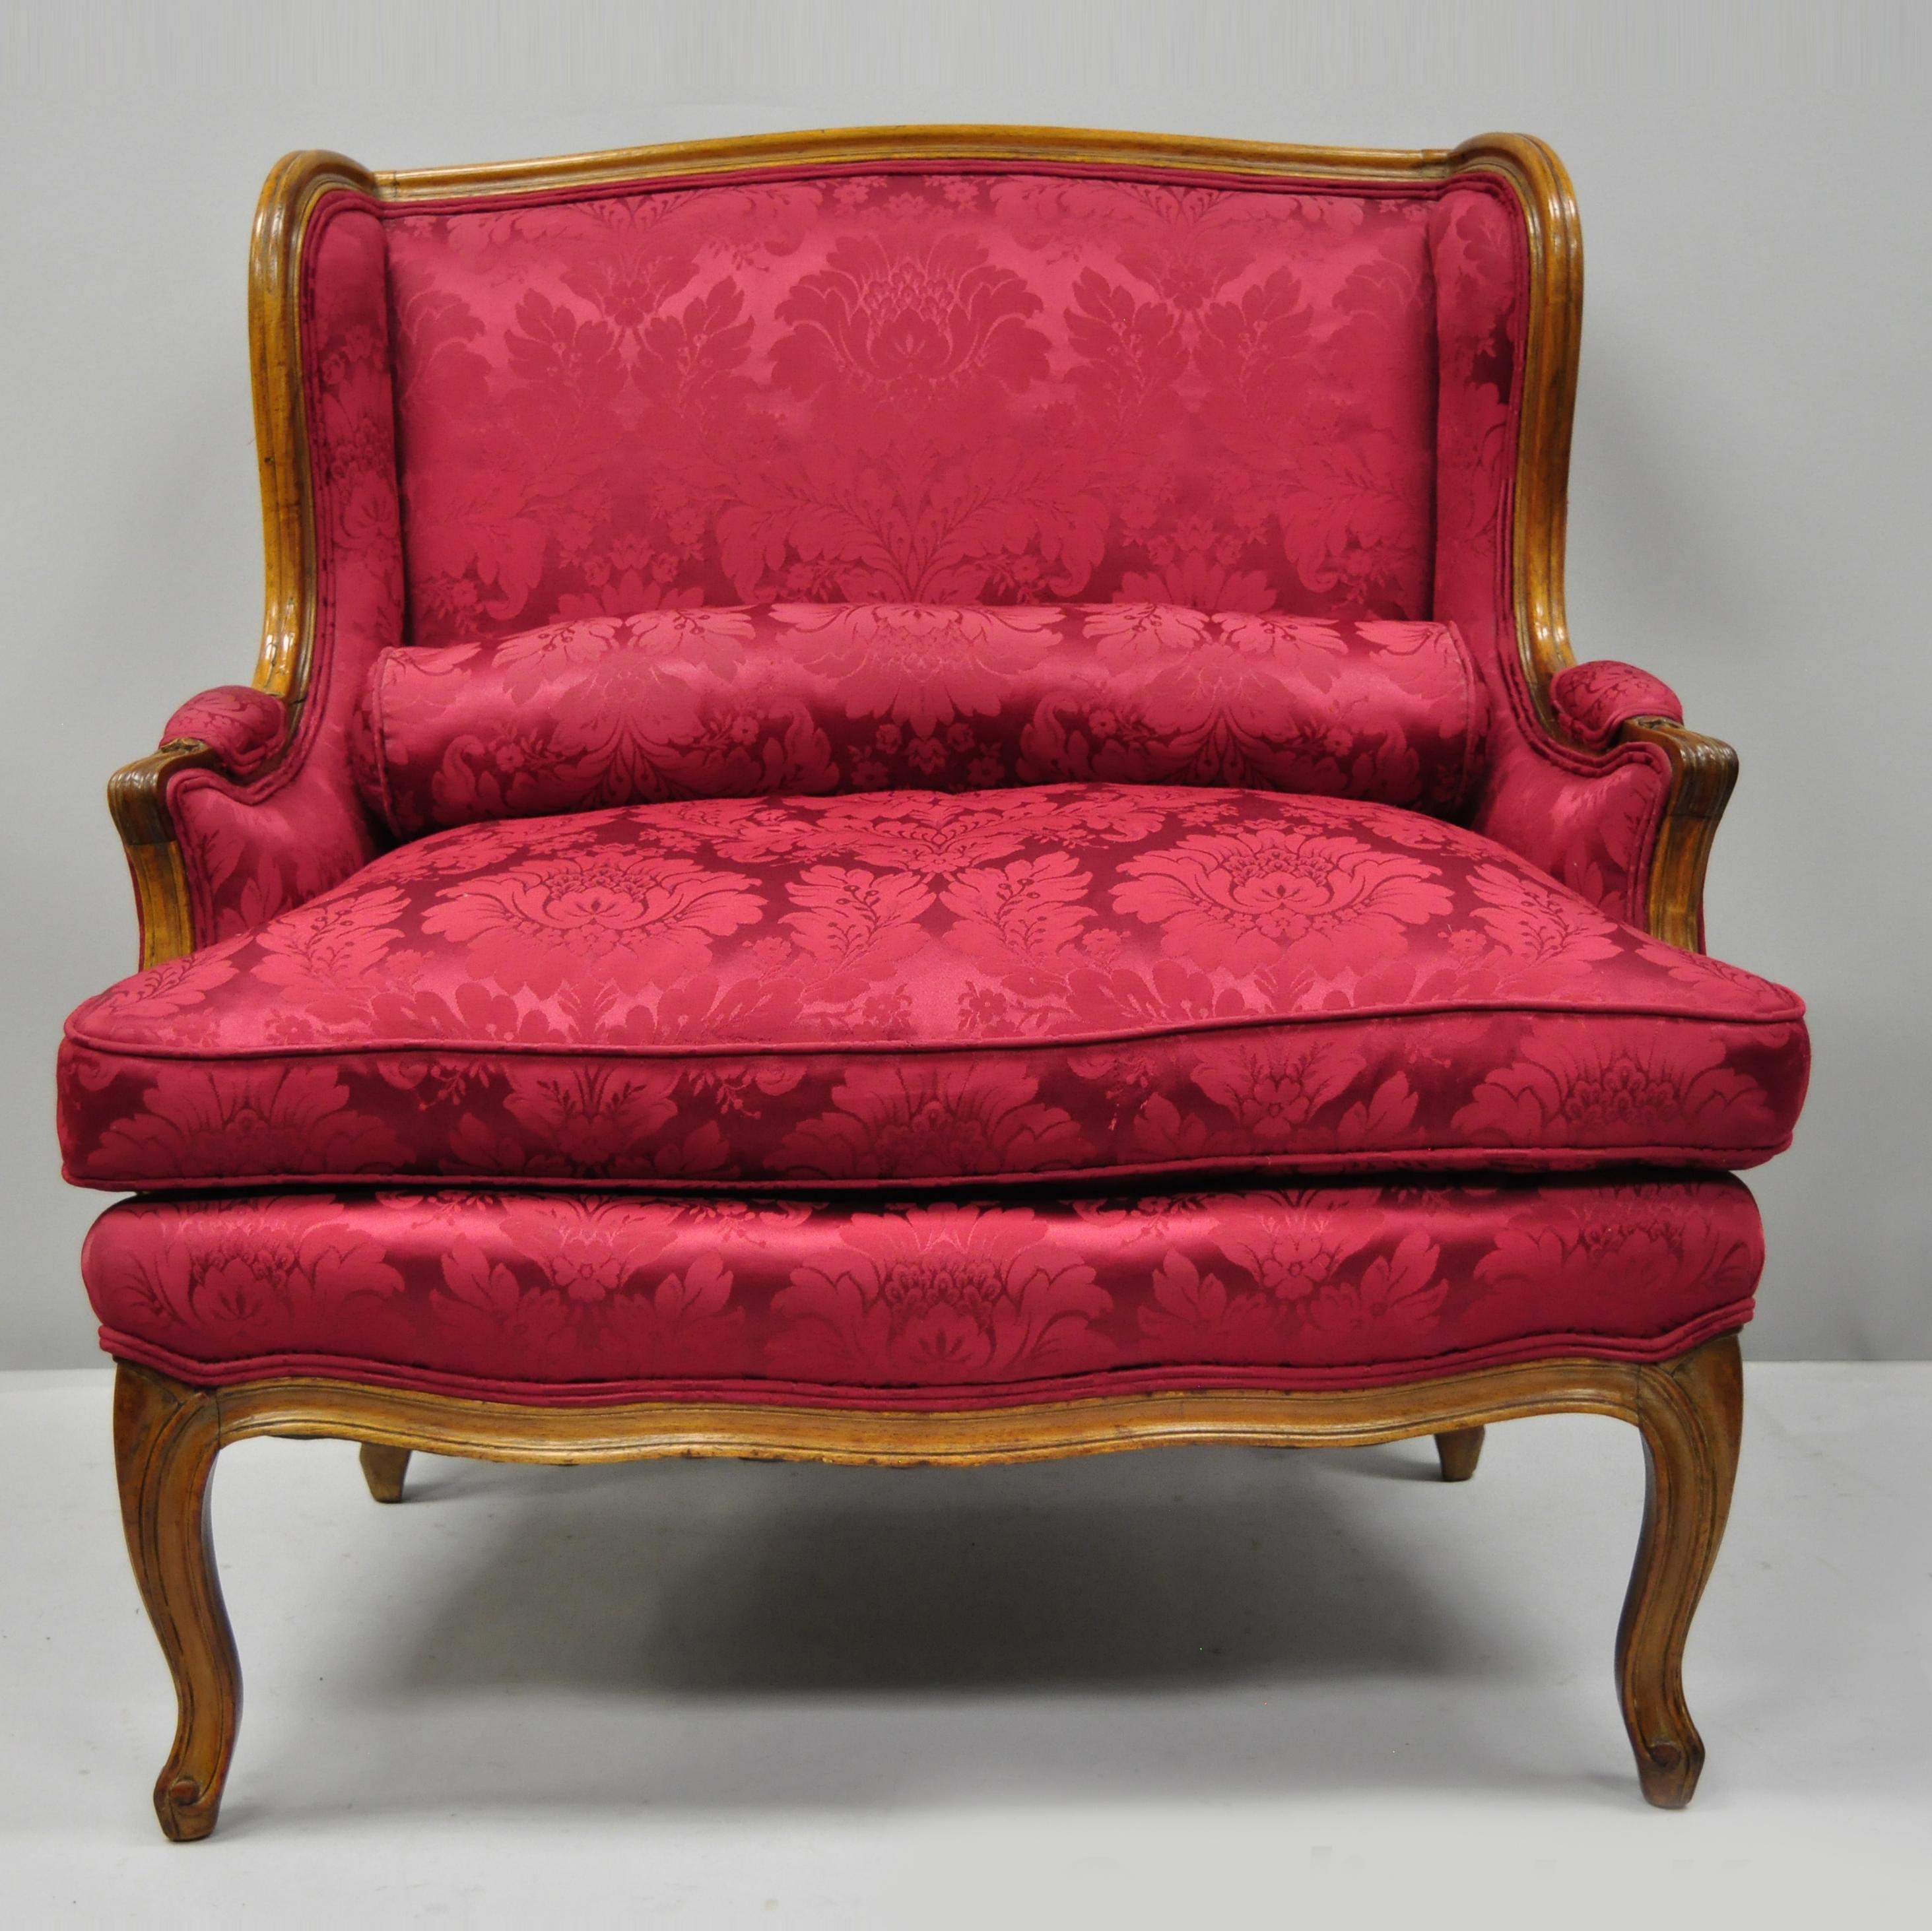 Antique French Country Louis XV style carved mahogany settee. Item features partial down filled cushion, bolster pillow, solid wood construction, and cabriole legs, circa 1950. Measurements: 36